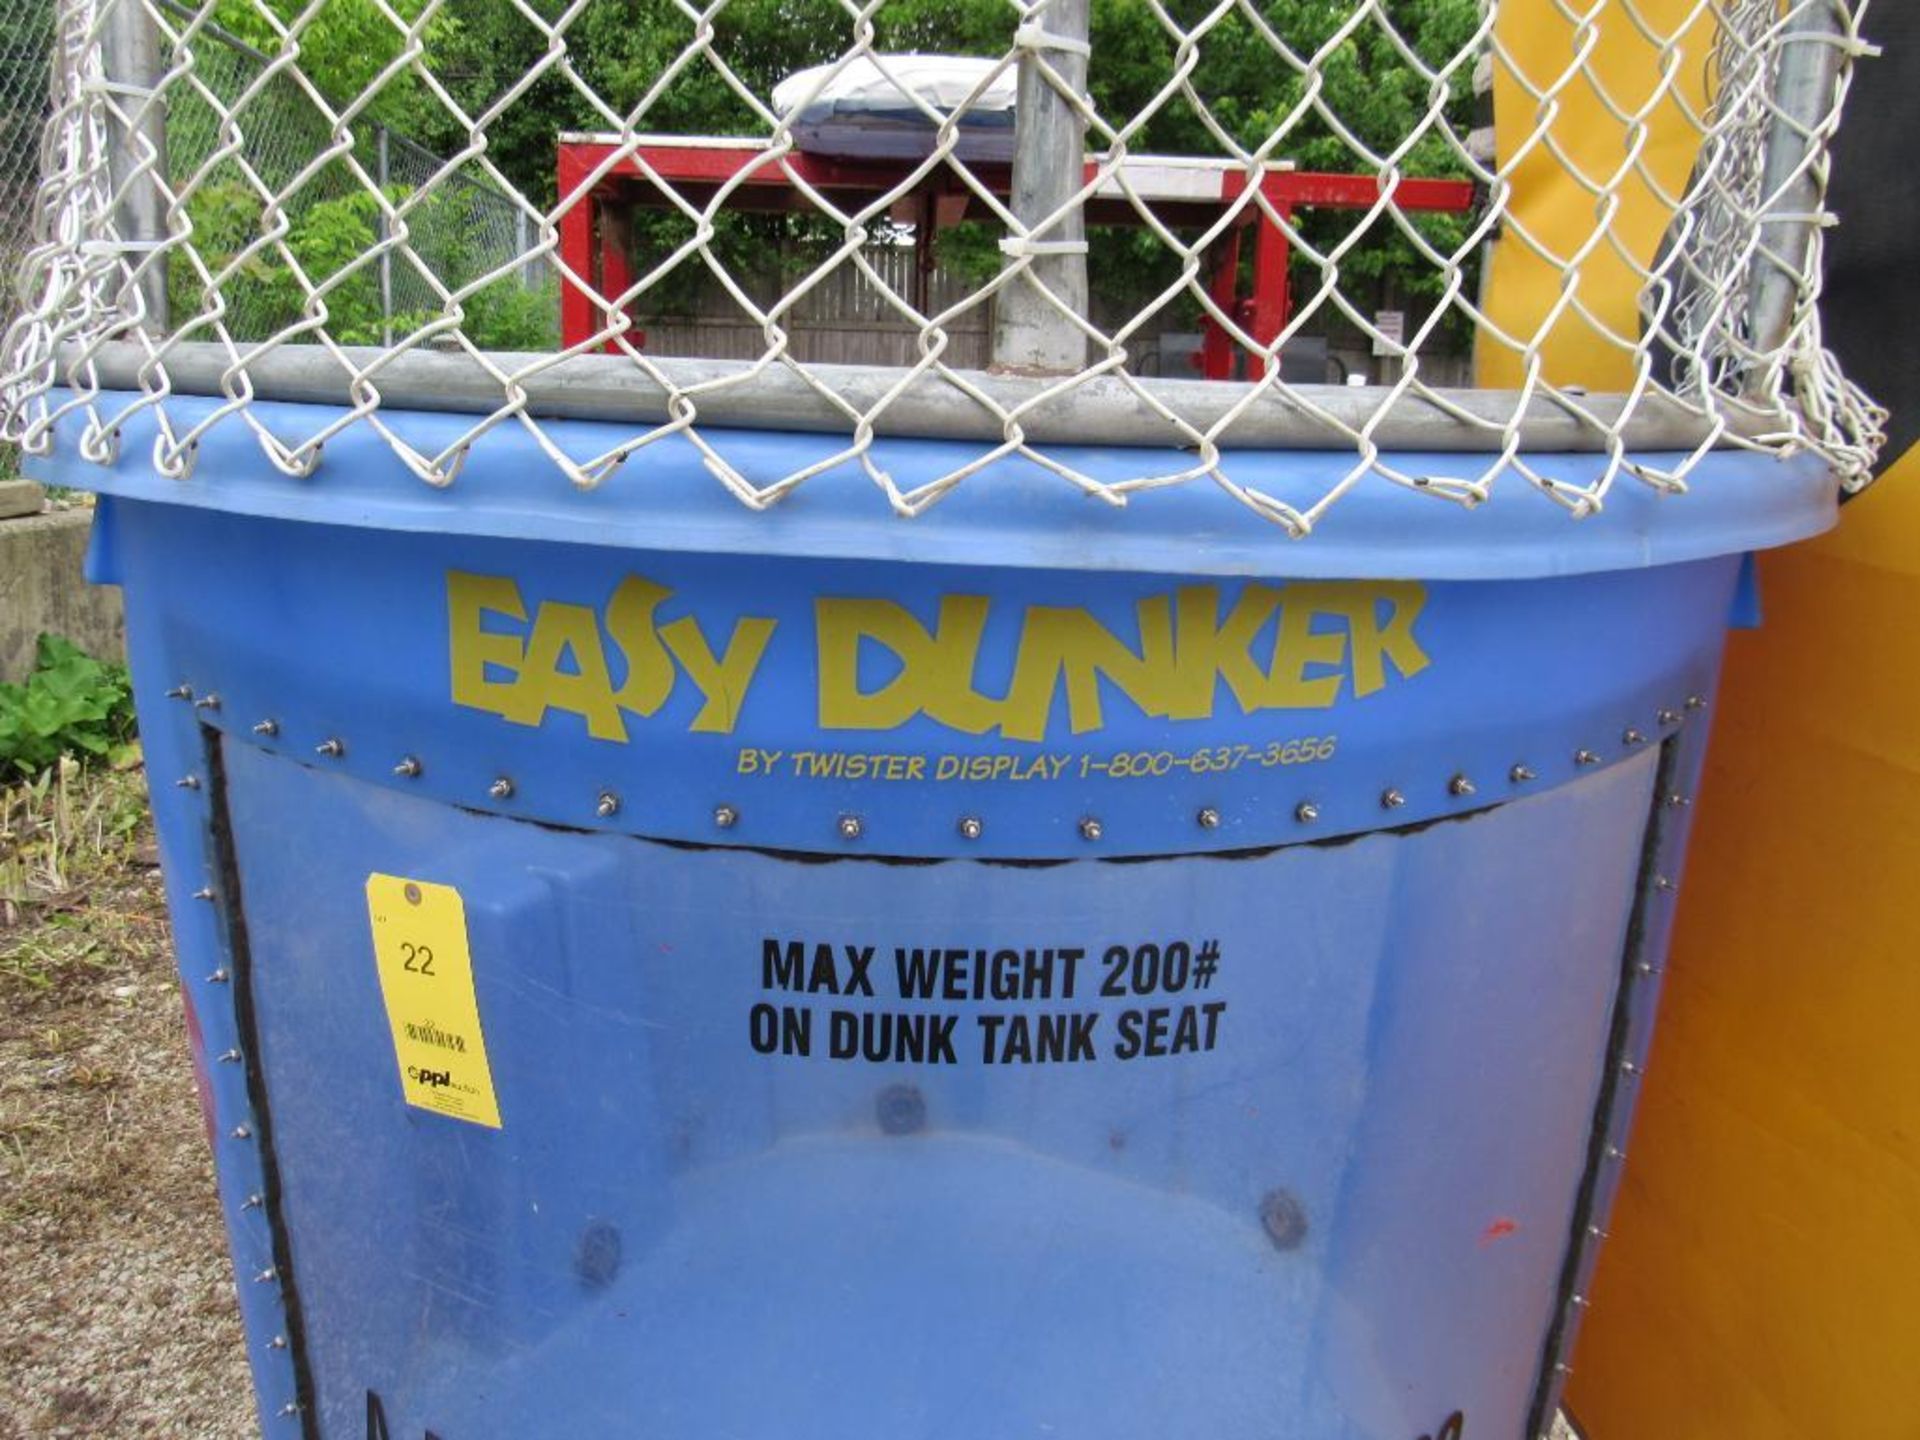 Dunk Tank Trailer mounted - includes bucket of balls, target and activation arm. See Lot 24A Misc. D - Image 6 of 6